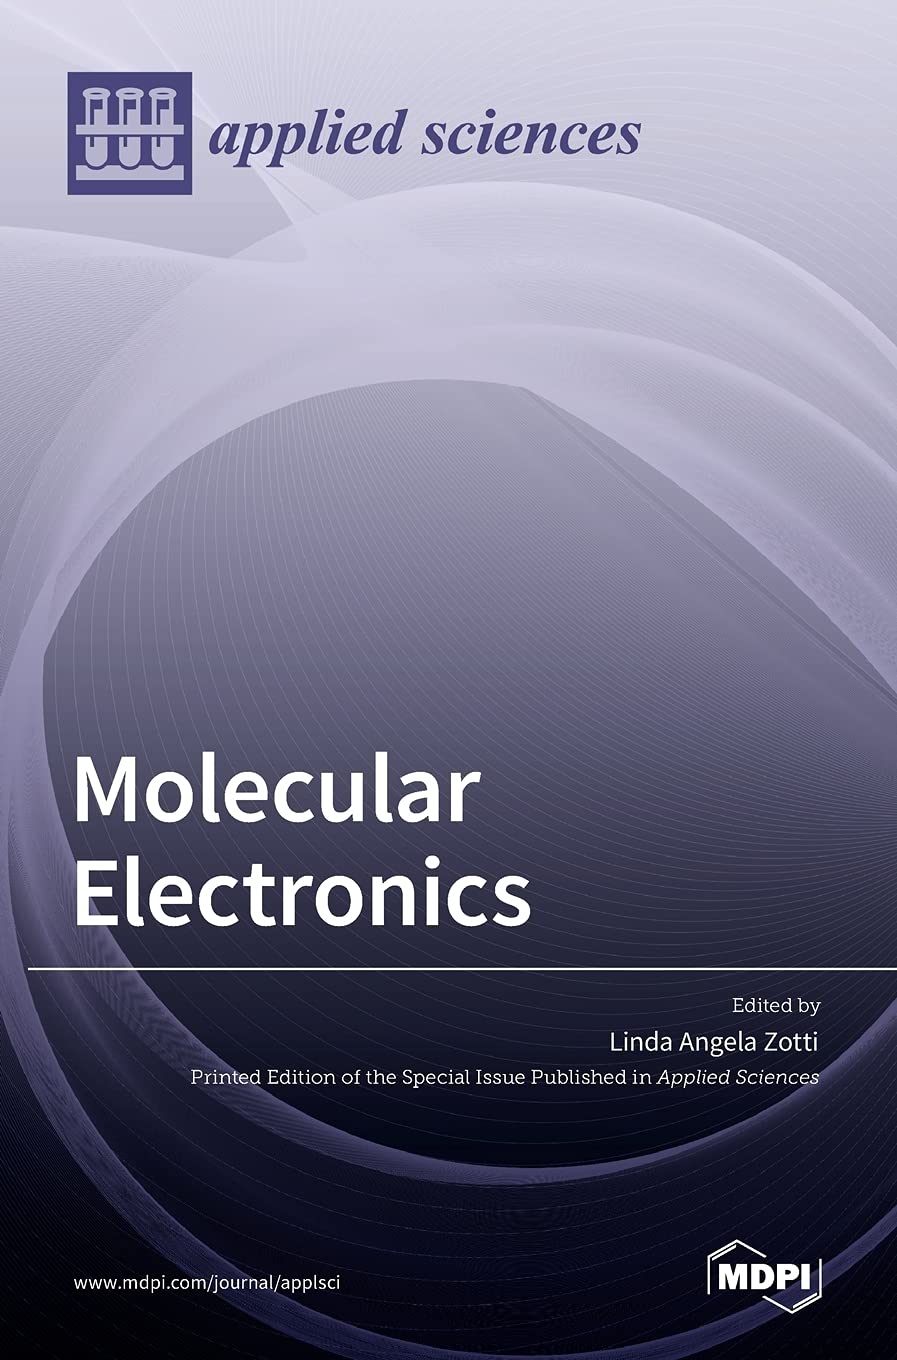 Special Issue on Molecular Electronics